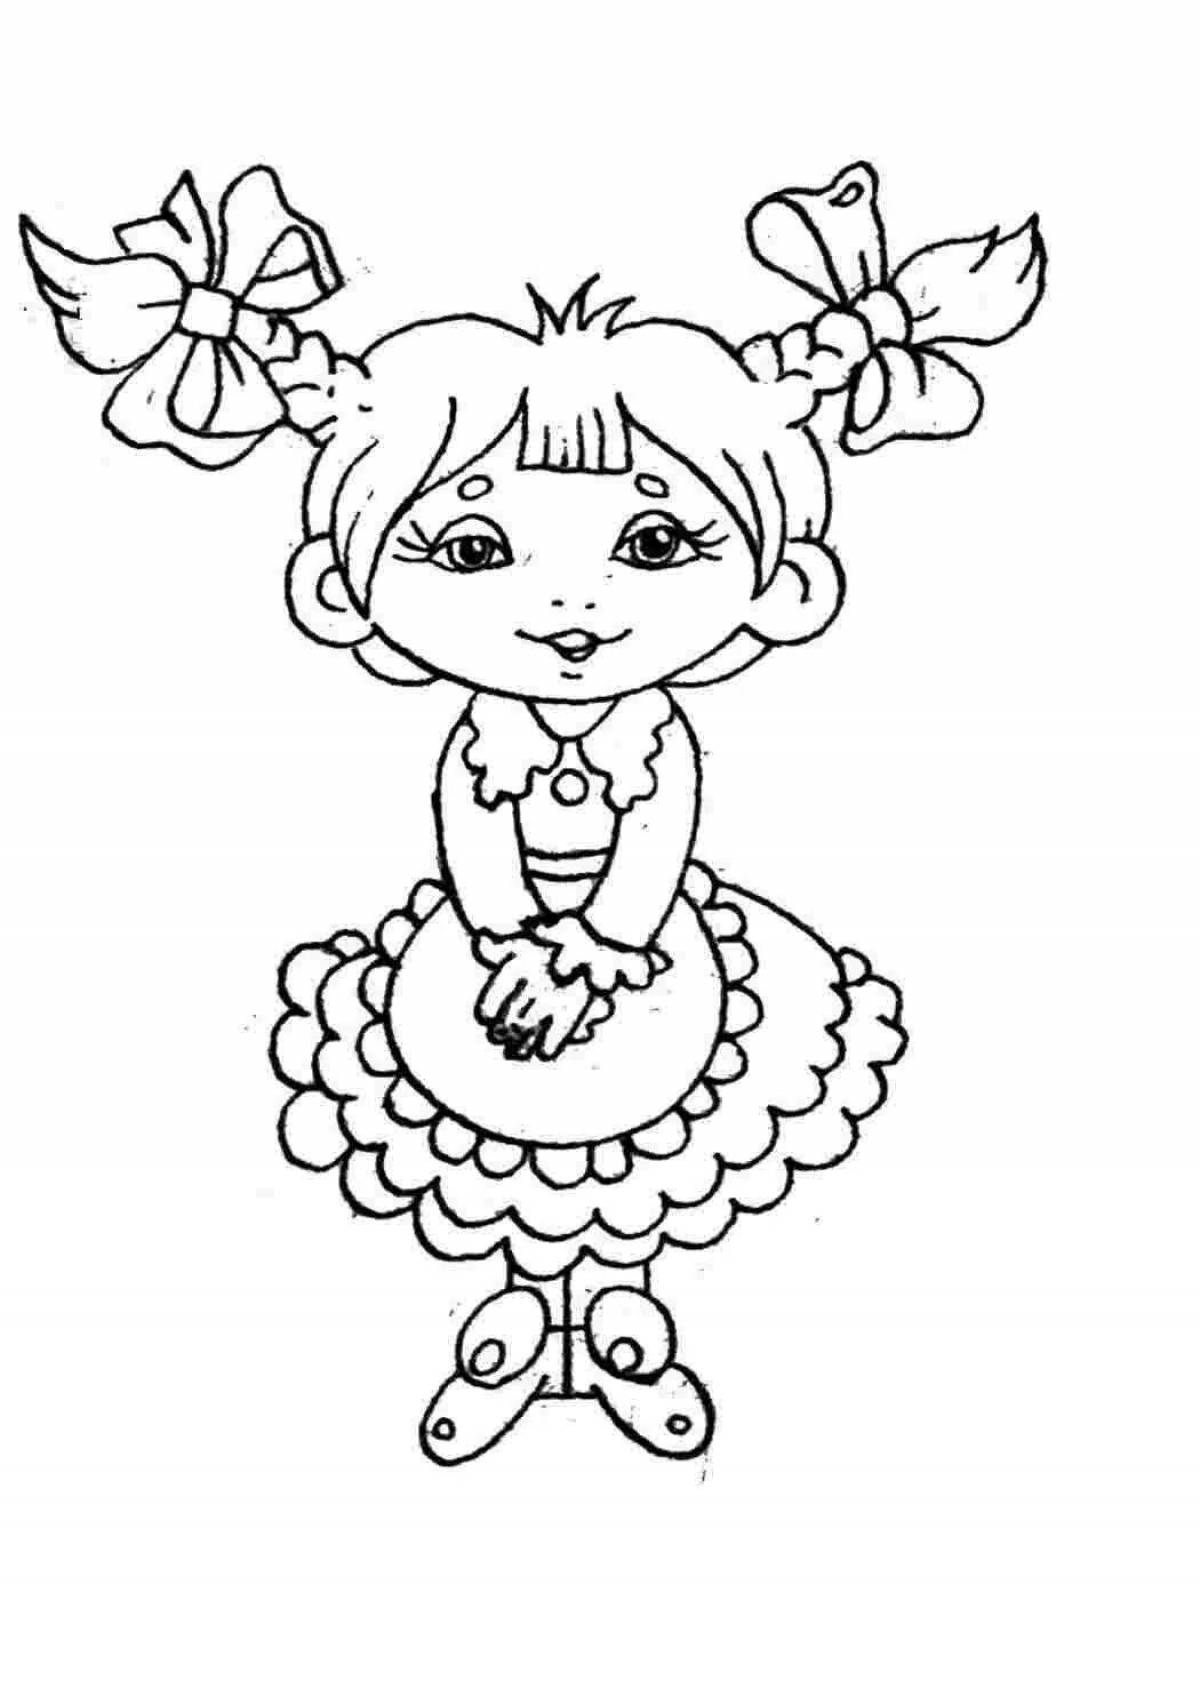 Coloring page charming granddaughter